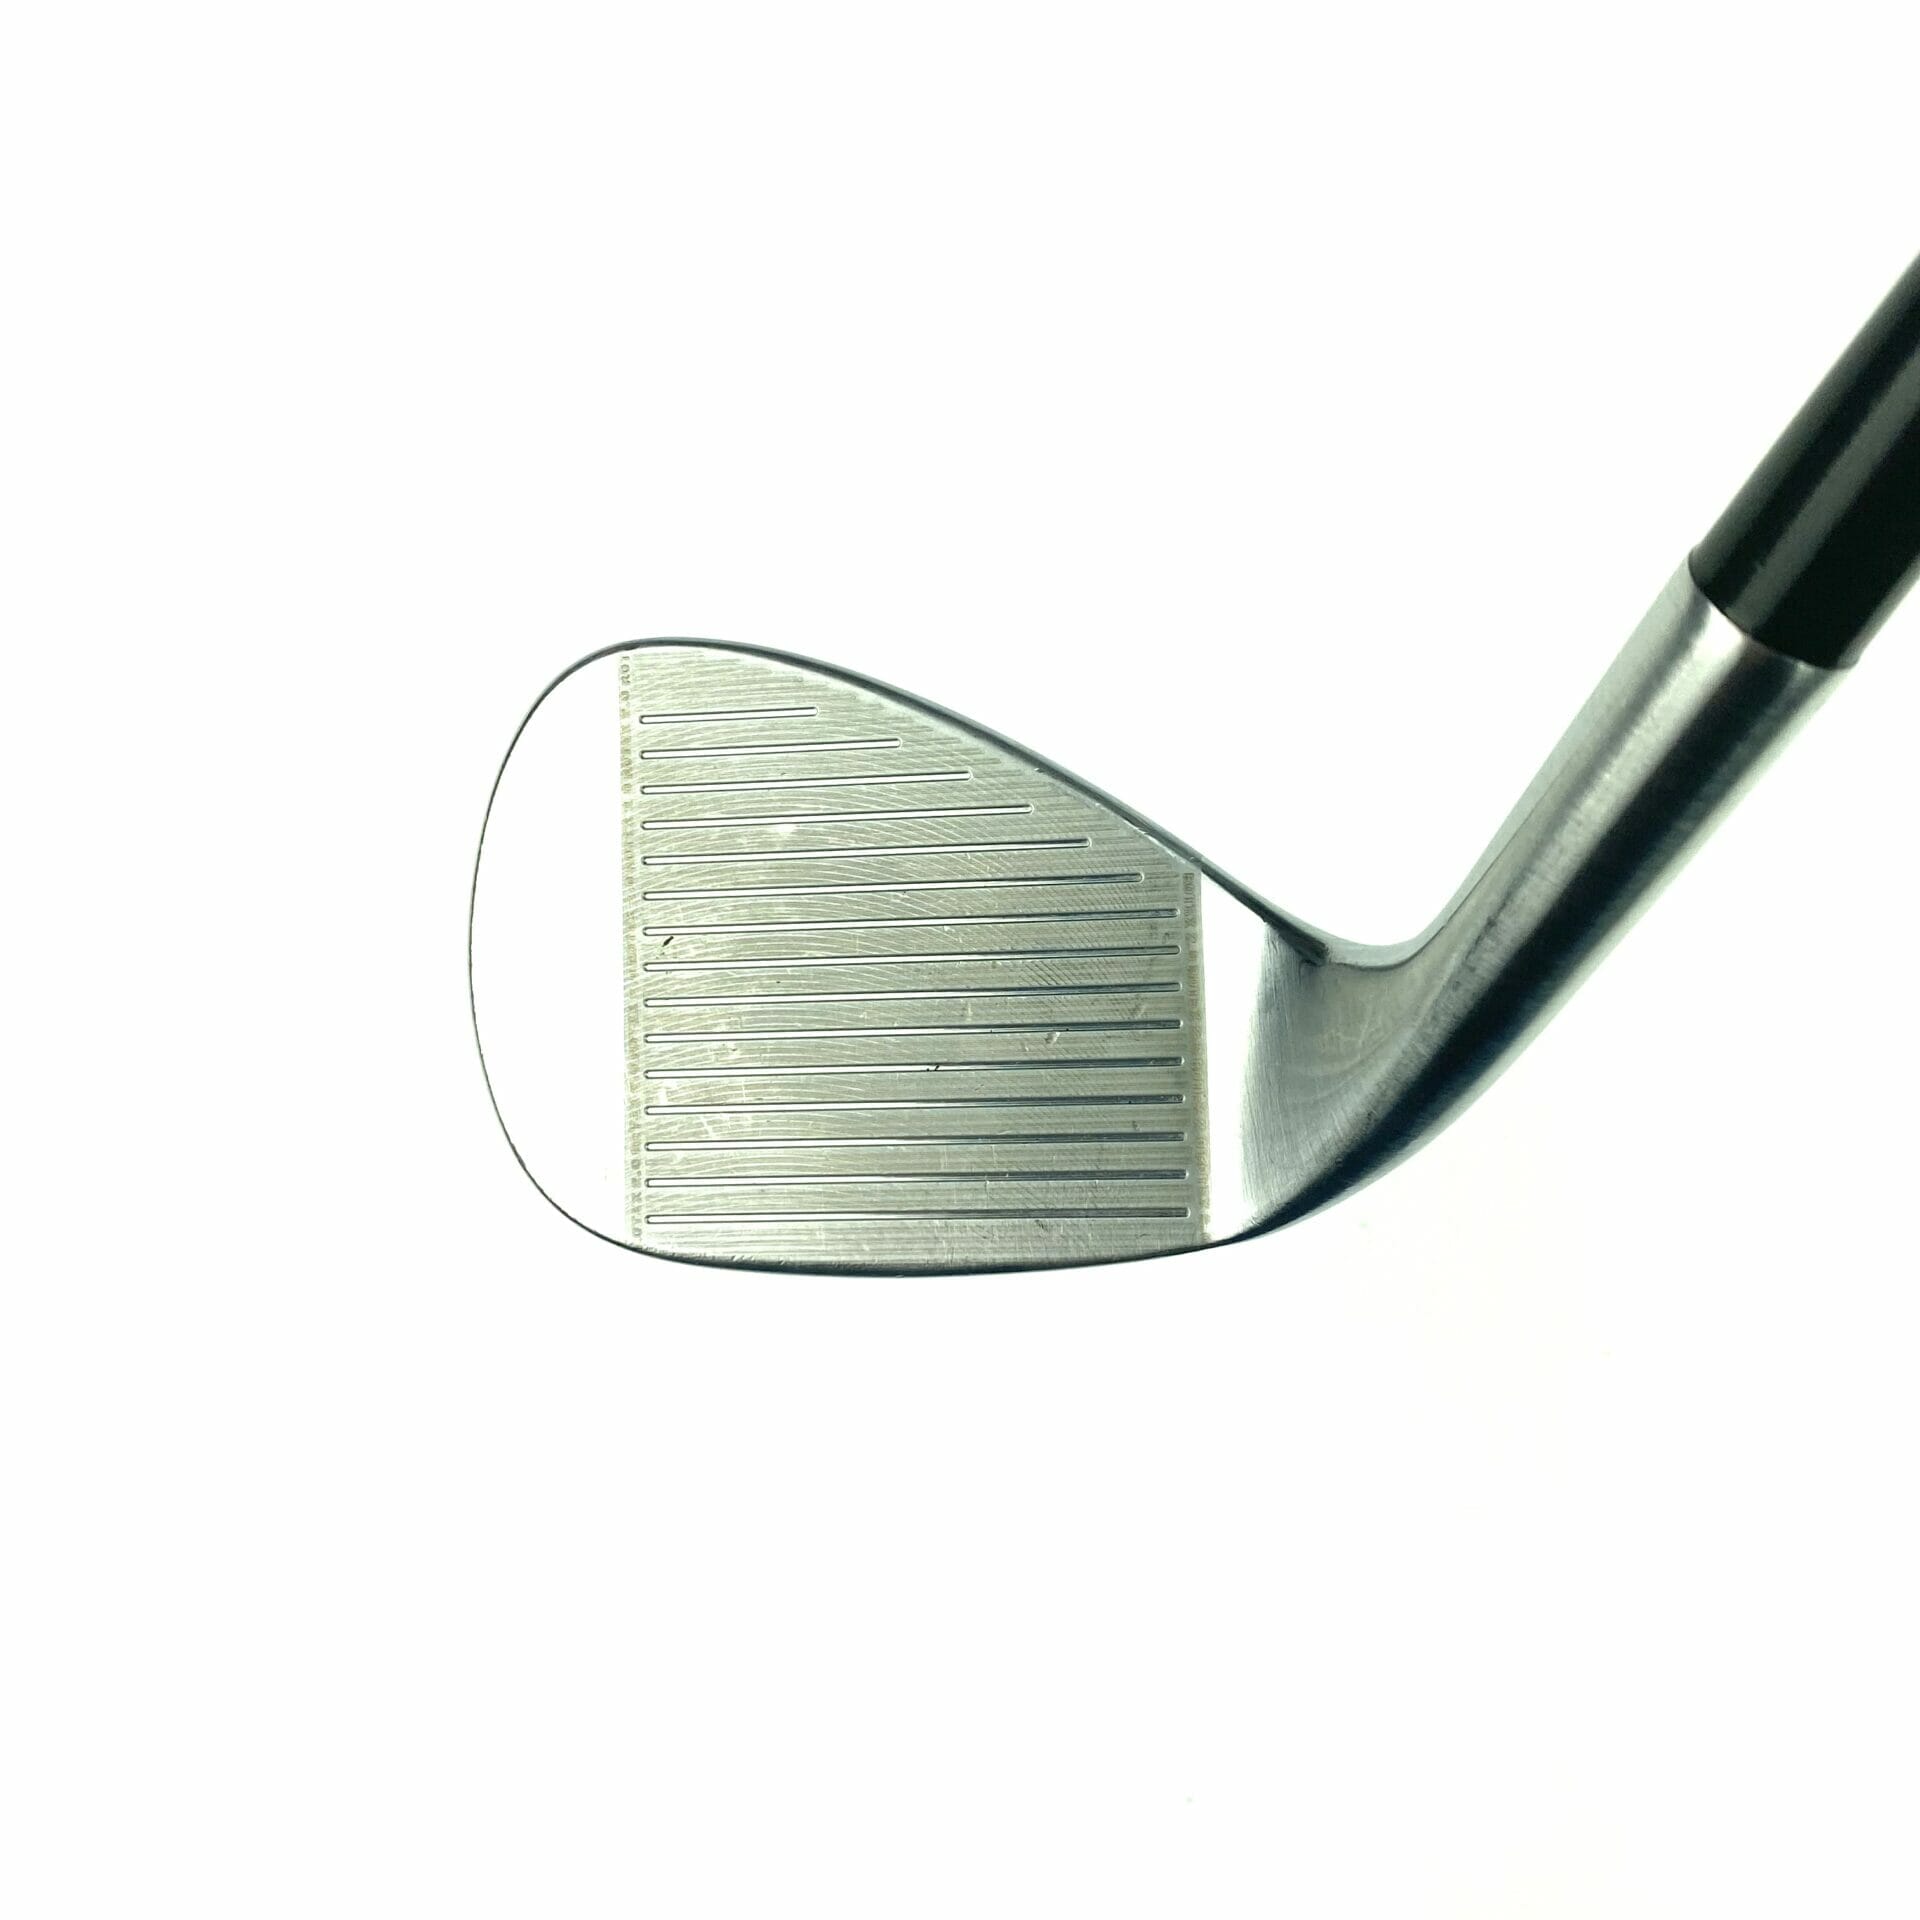 Cleveland RTX CB 588 Pitching Wedge / 48 Degree / Action Ultralite